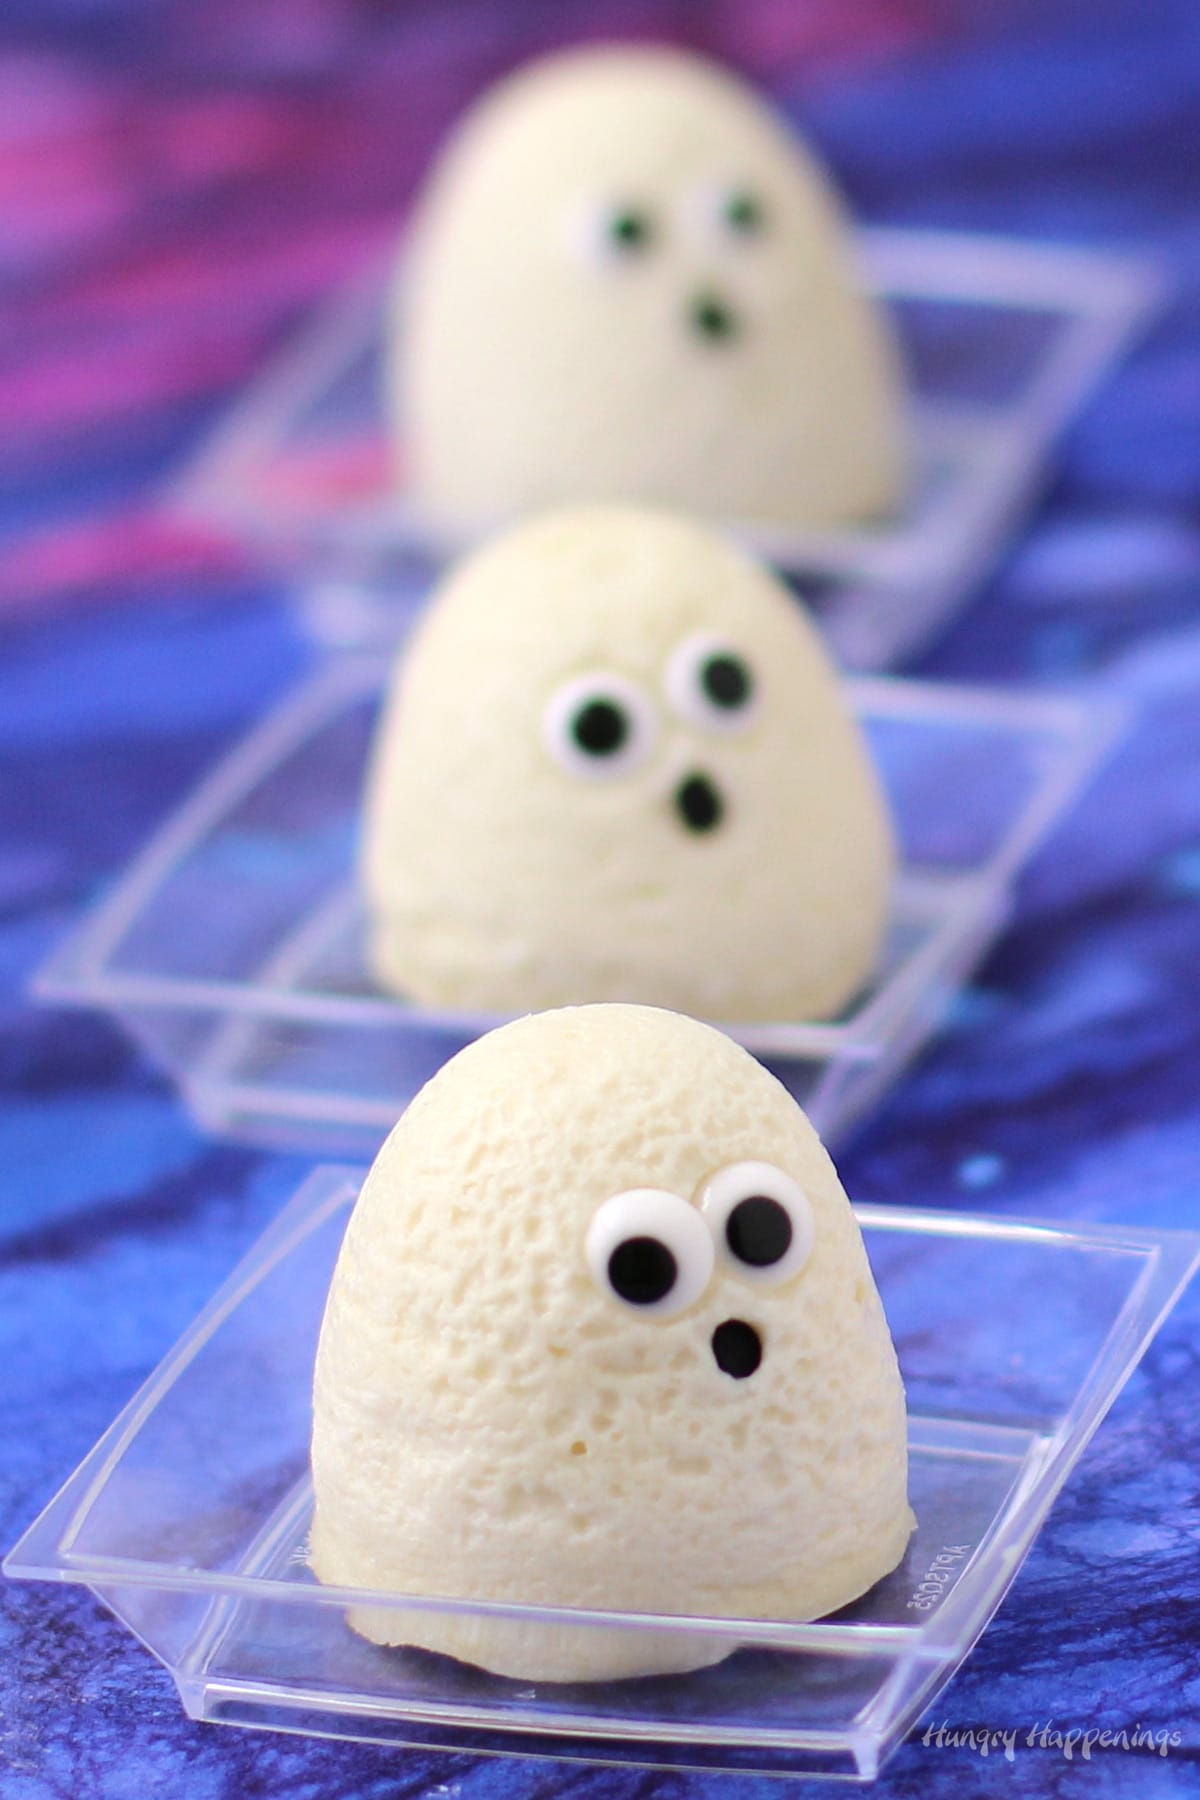 little Halloween cheesecake ghosts with candy eyes and black confetti sprinkle mouths.